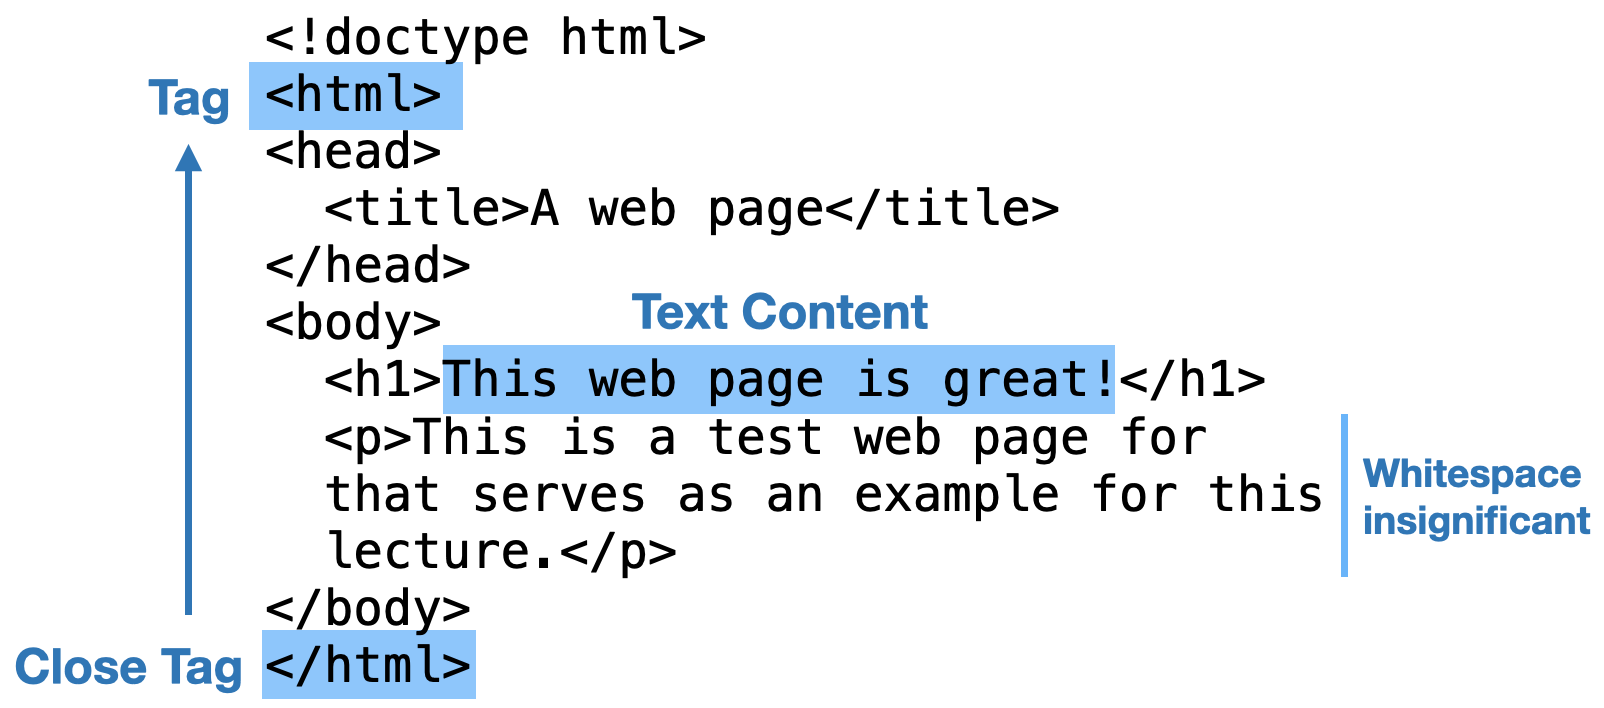 Figure 1: An HTML document, showing tags, text, and the nesting structure.